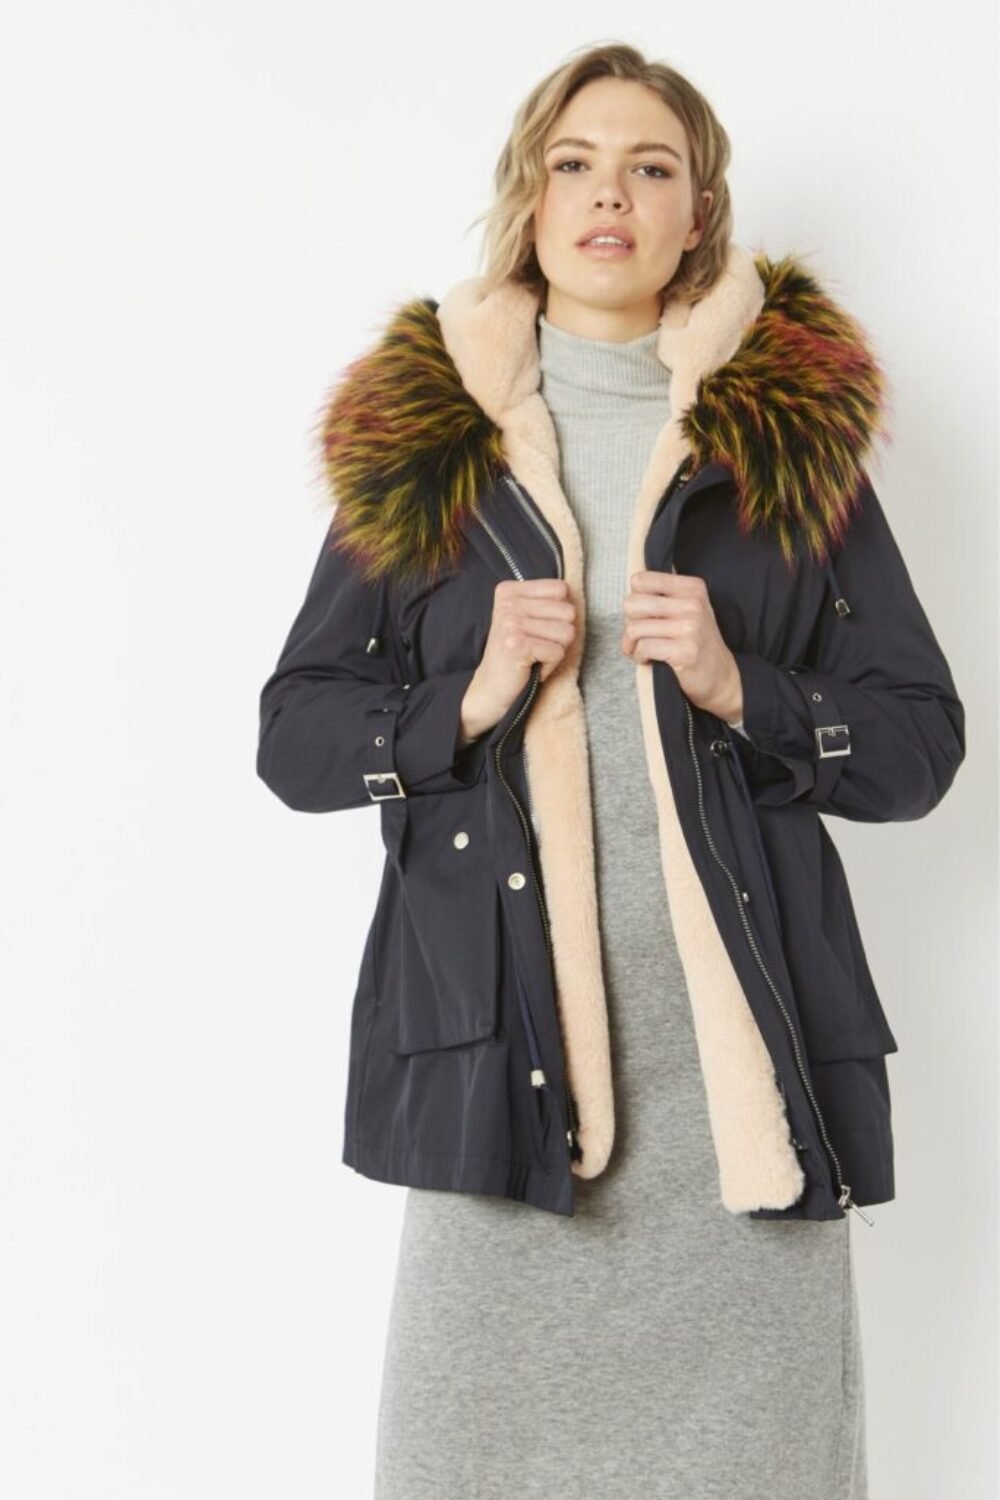 Shop Lux Navy Three in One Faux Fur Parka Coat and women's luxury and designer clothes at www.lux-apparel.co.uk